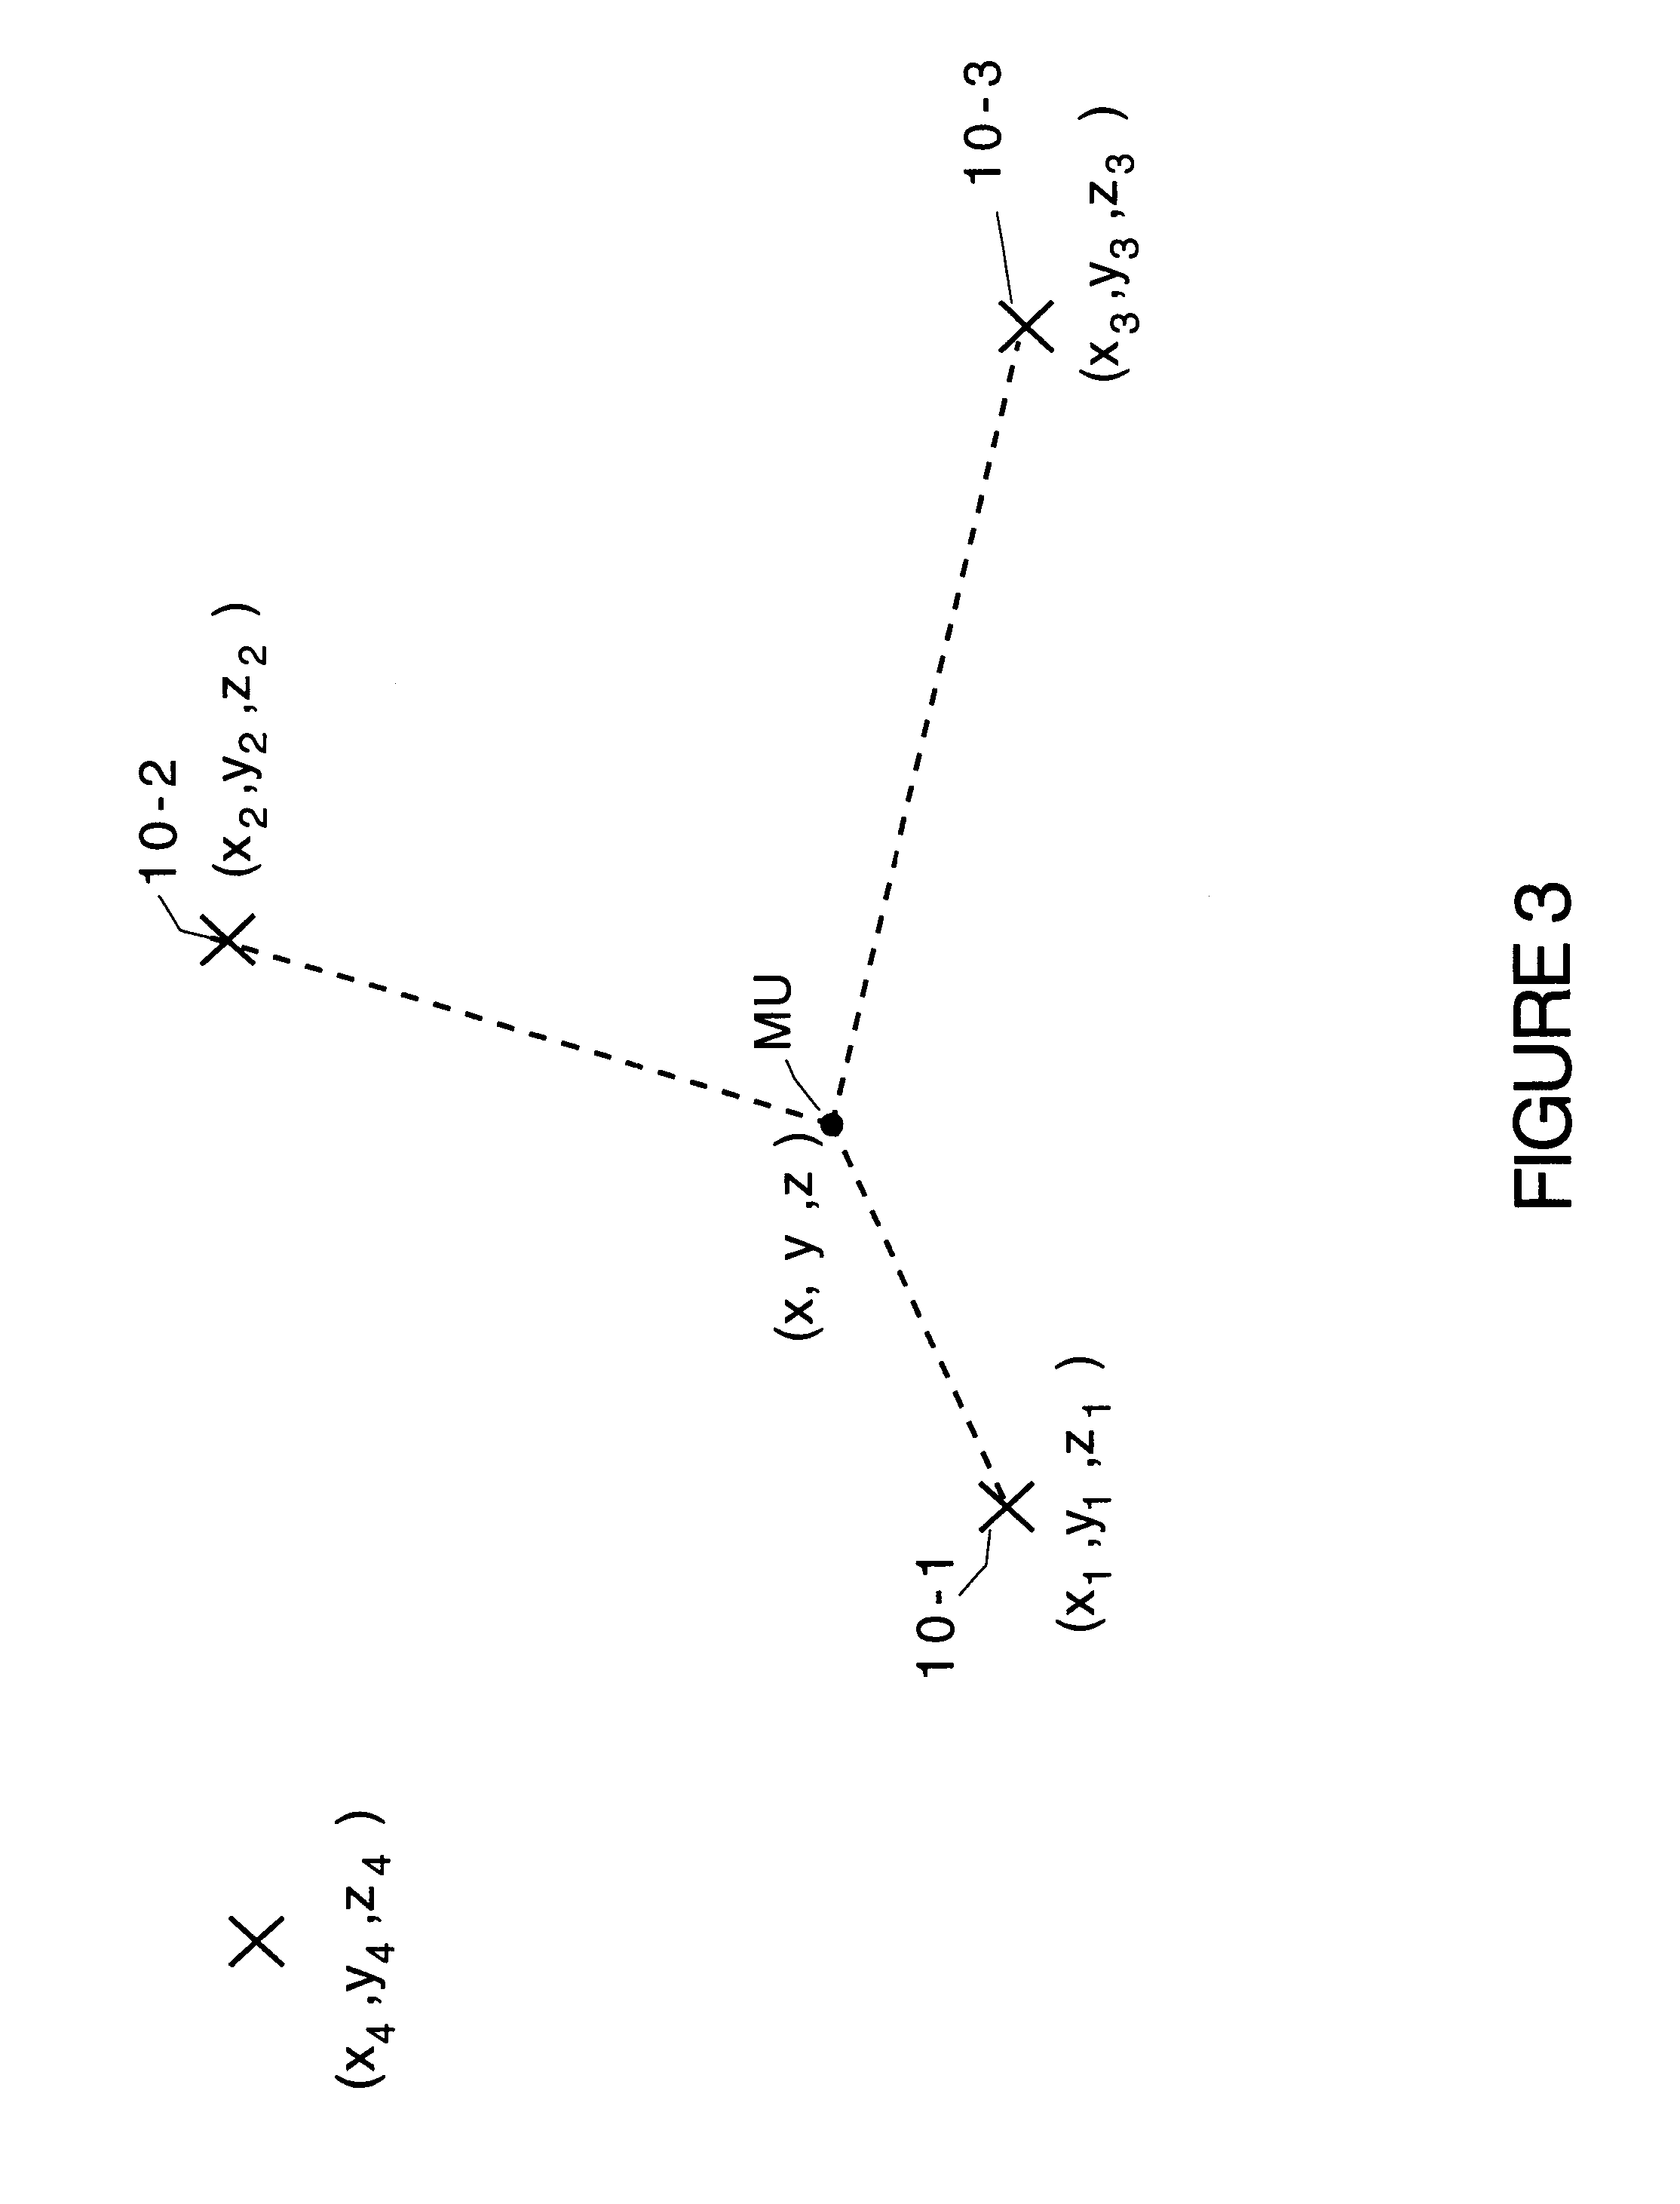 Position enhanced communication system including system for embedding CDMA navigation beacons under the communications signals of a wireless communication system